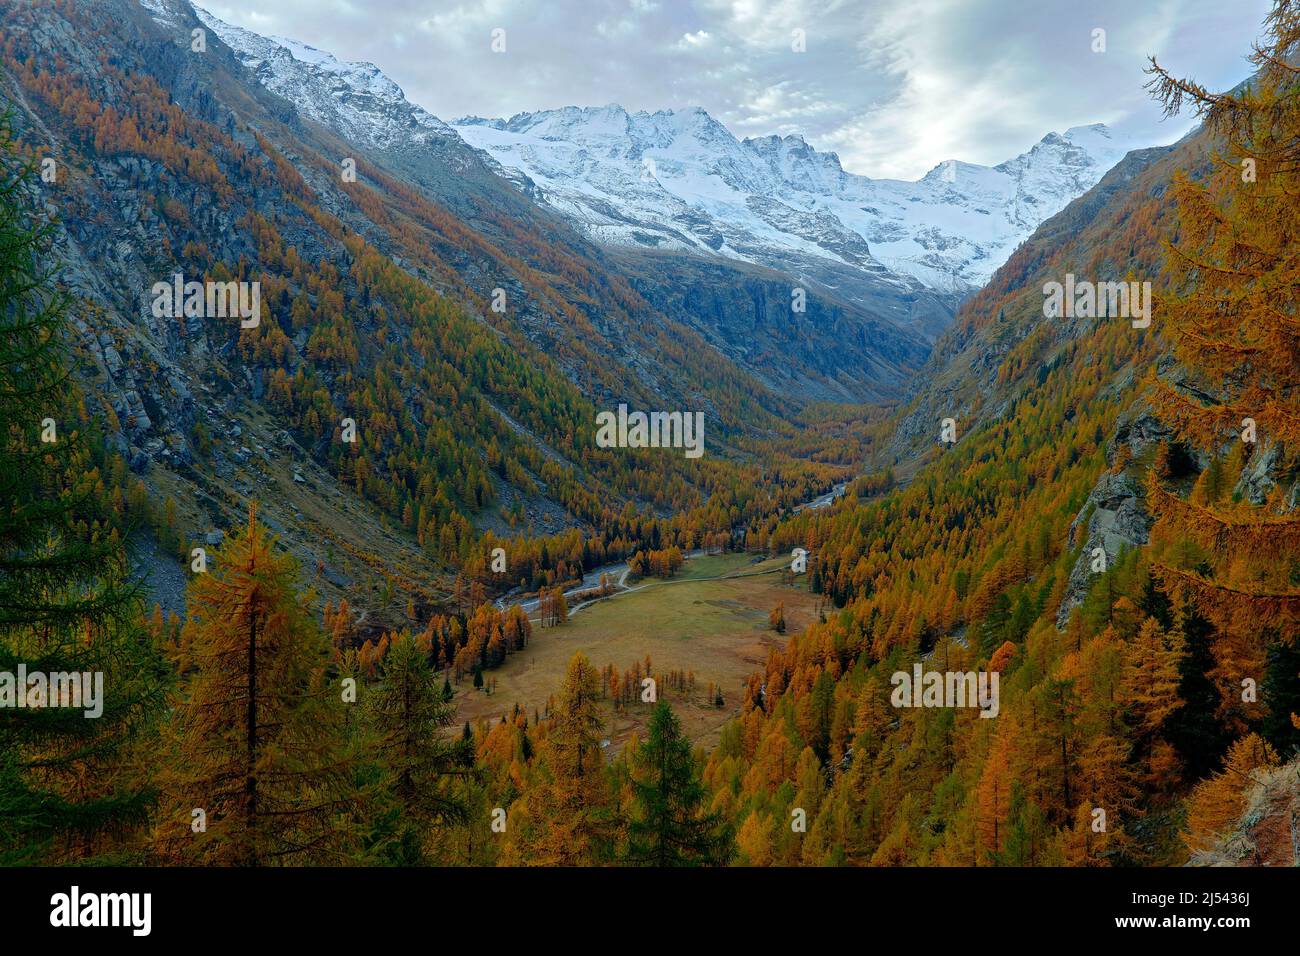 Autumn lanscape in the Alp. Nature habitat with autumn orange larch tree and rocks in background, National Park Gran Paradiso, Italy. Orange larch for Stock Photo